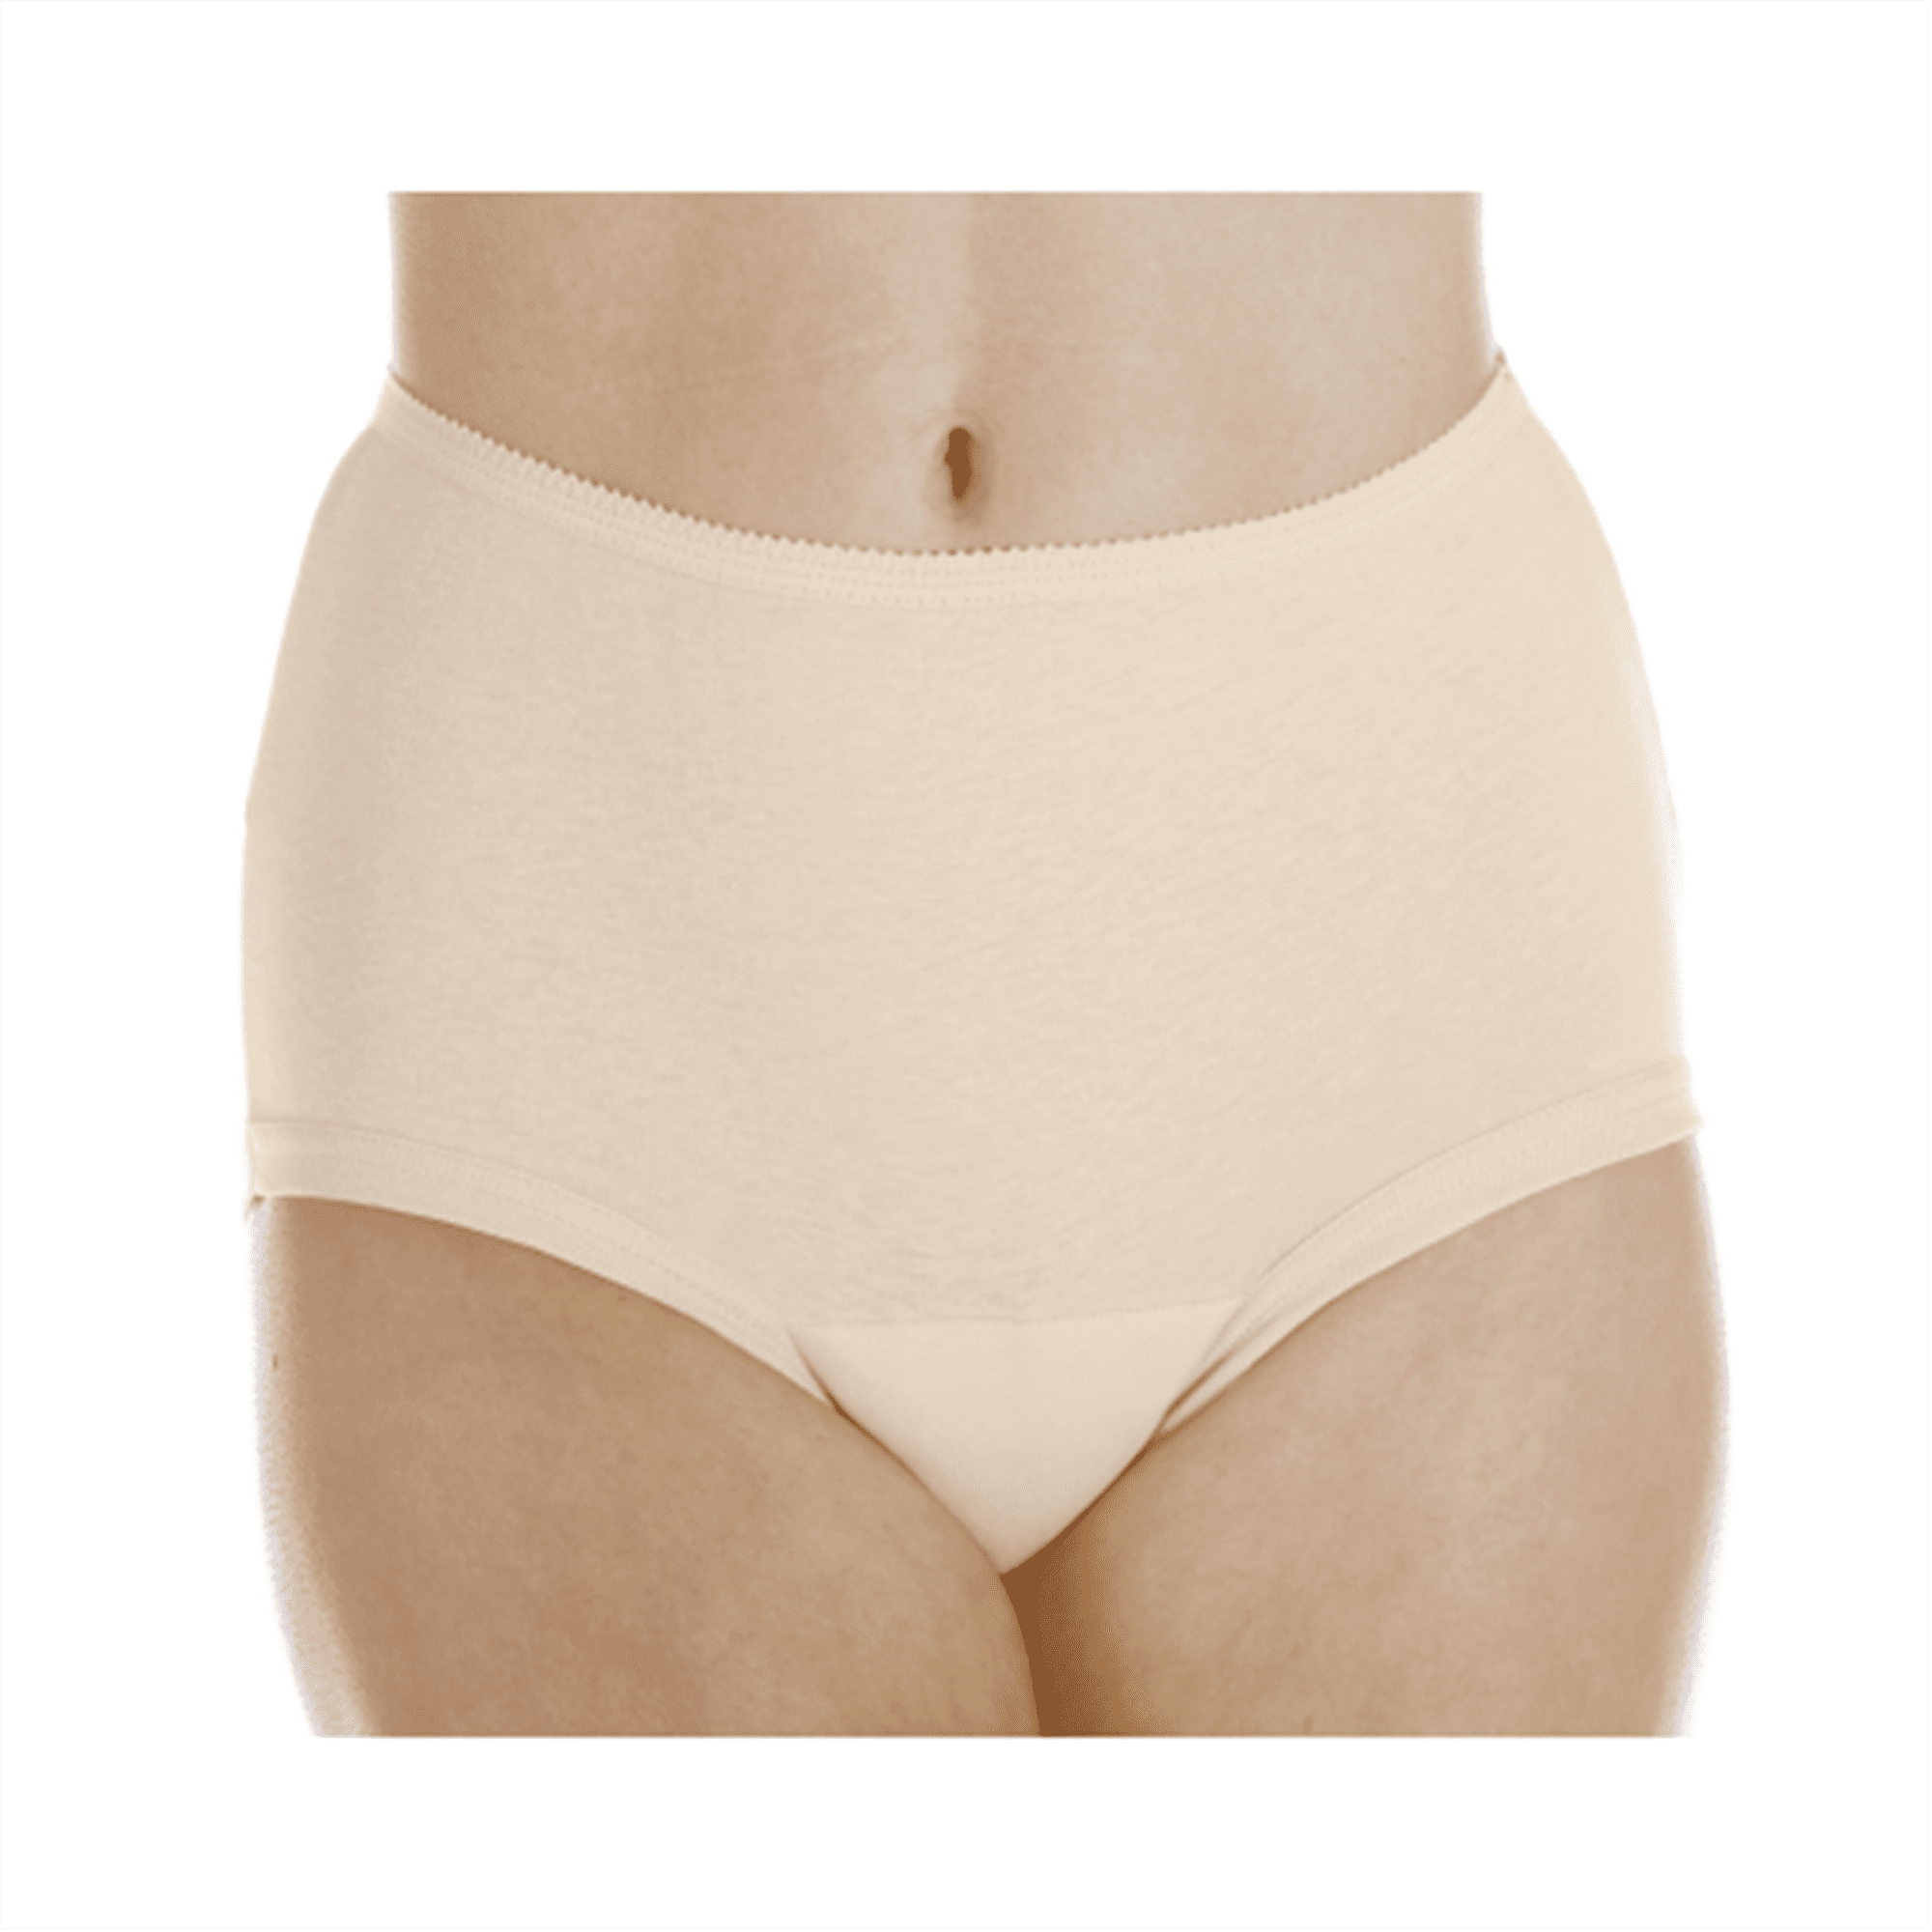 Prime Life Fibers Incontinence Underwear for Women in Incontinence